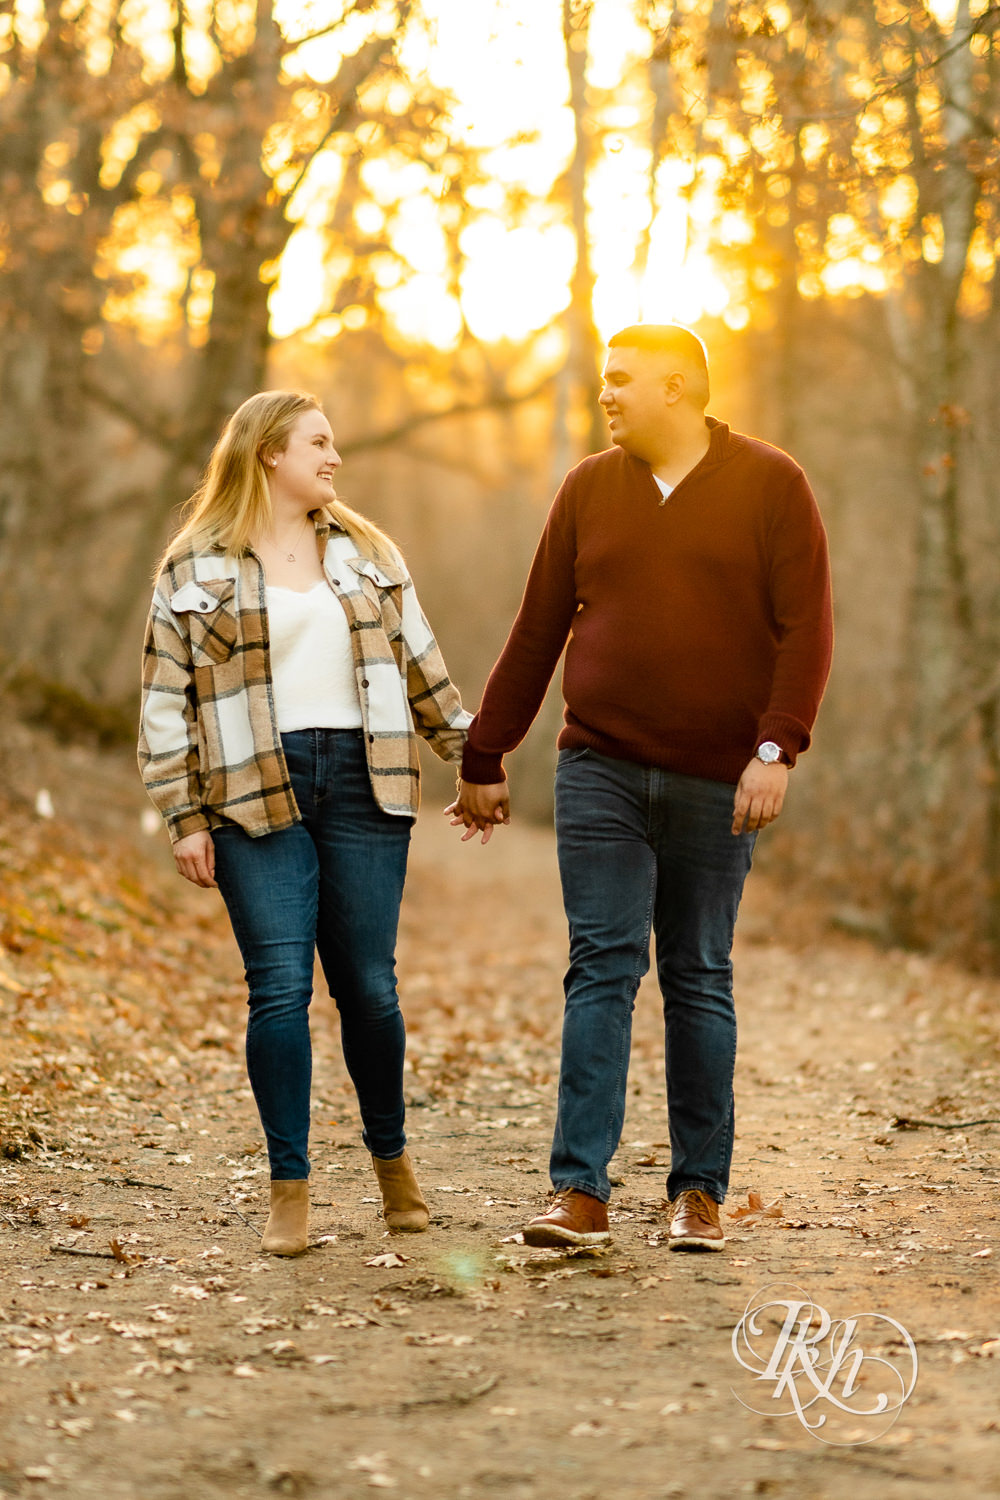 Filipino man and woman in flannel and jeans and kiss while walking towards sunset at Lebanon Hills in Eagan, Minnesota.